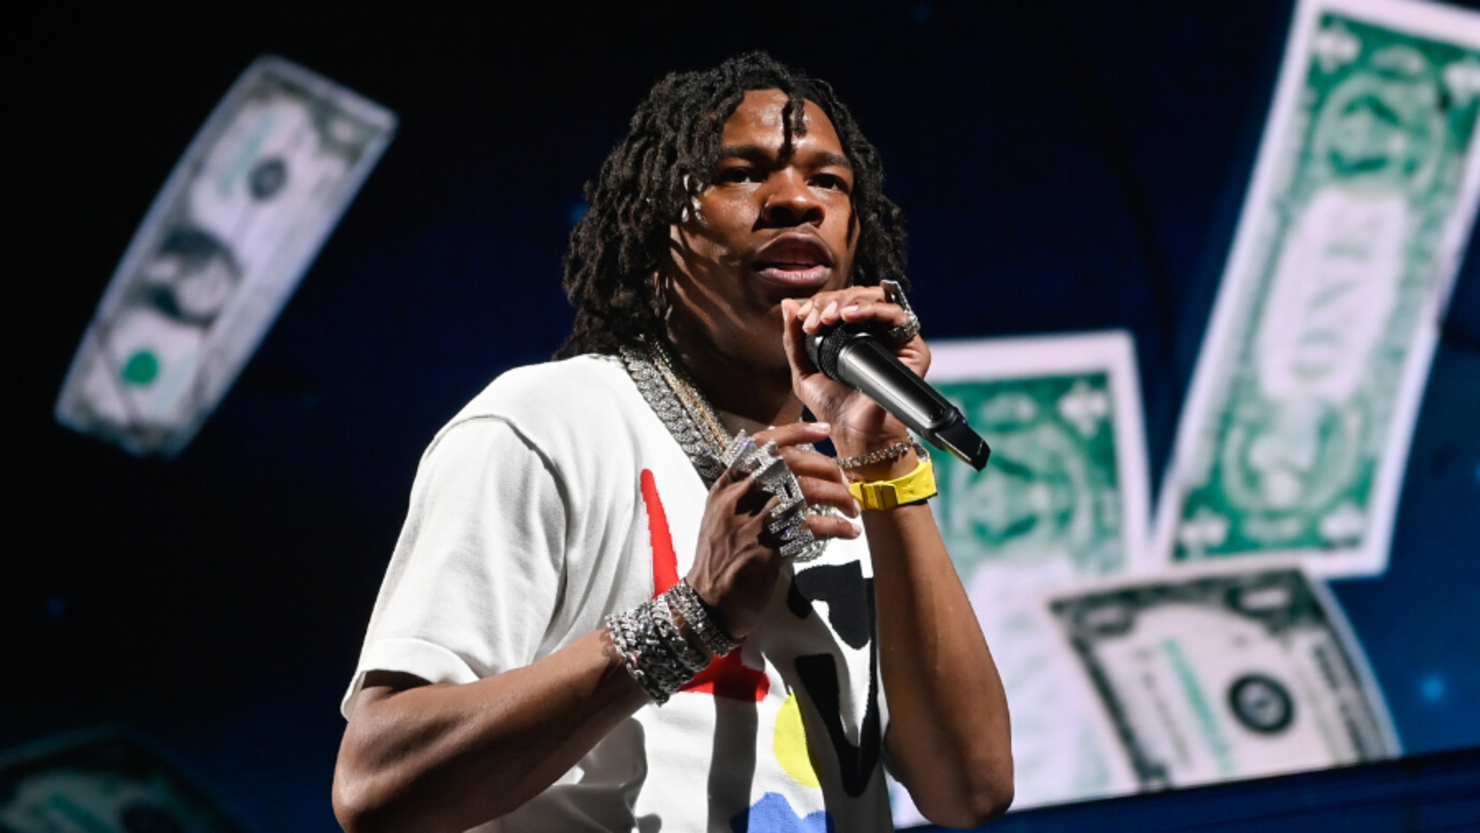 Lil Baby Wins 1 Million At Las Vegas Casino And Shares It With His